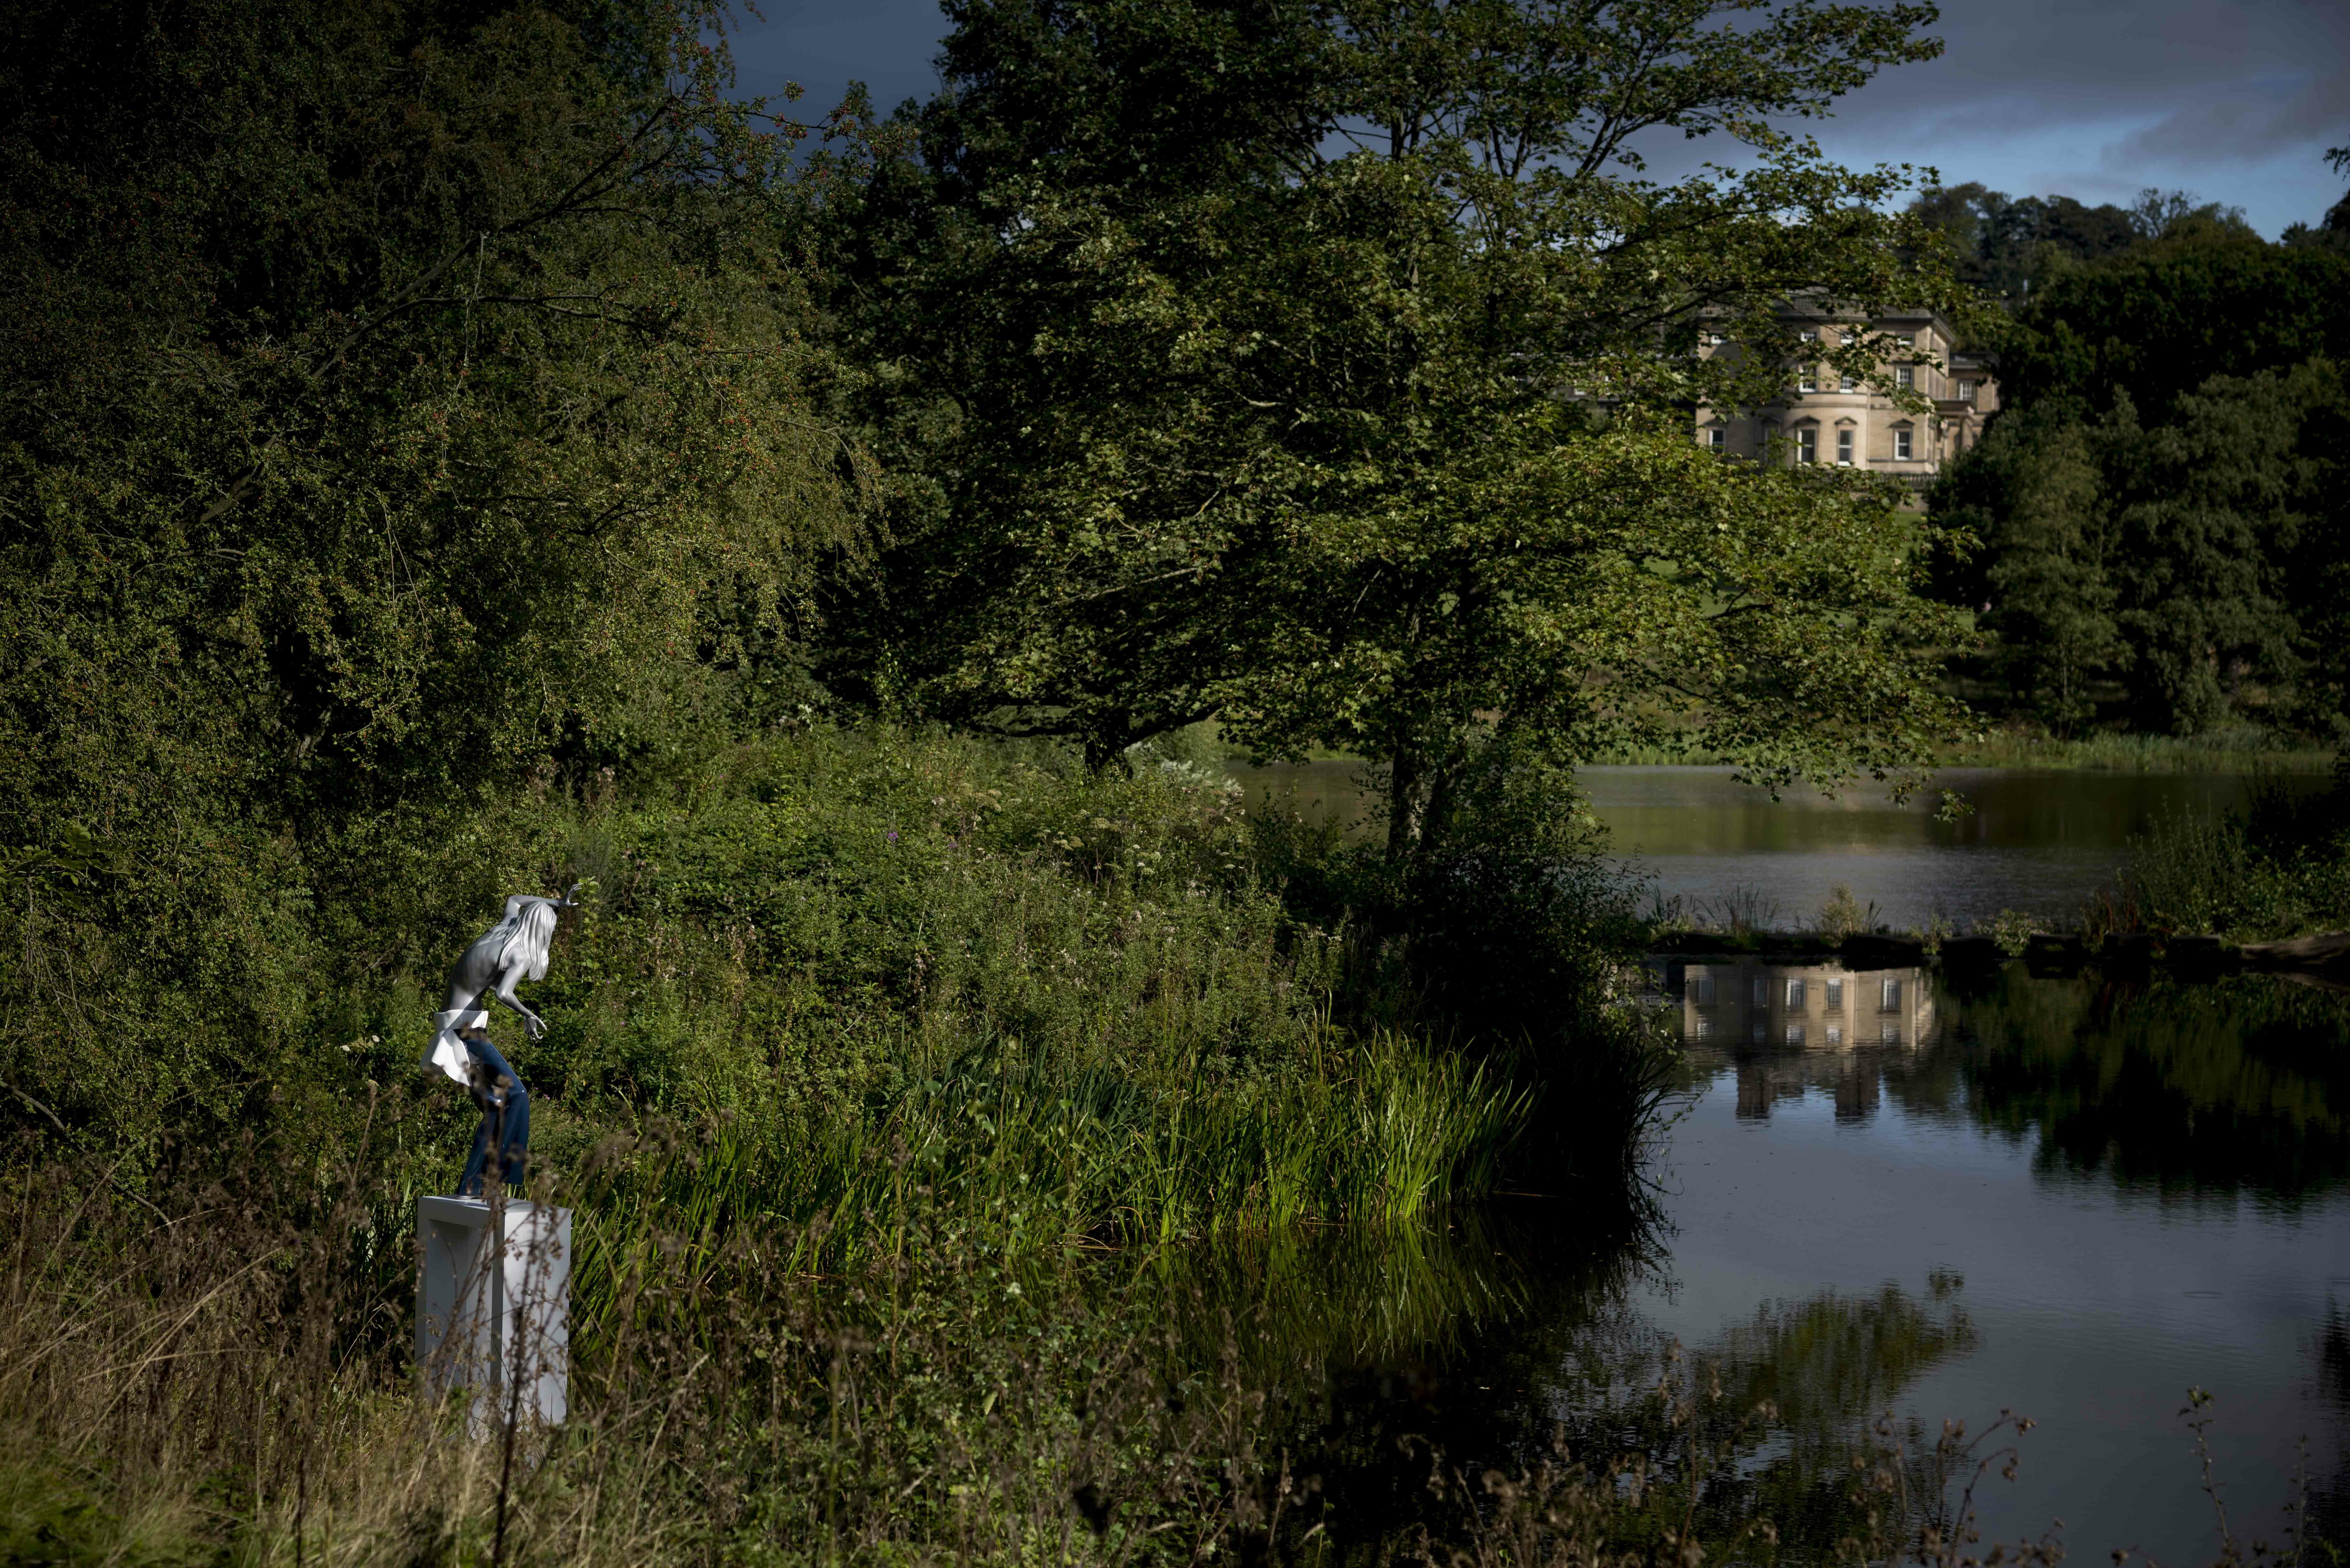 A female figure wearing jeans standing on a white plinth at the edge of a lake, surrounded by foliage. Bretton Hall is in the distance